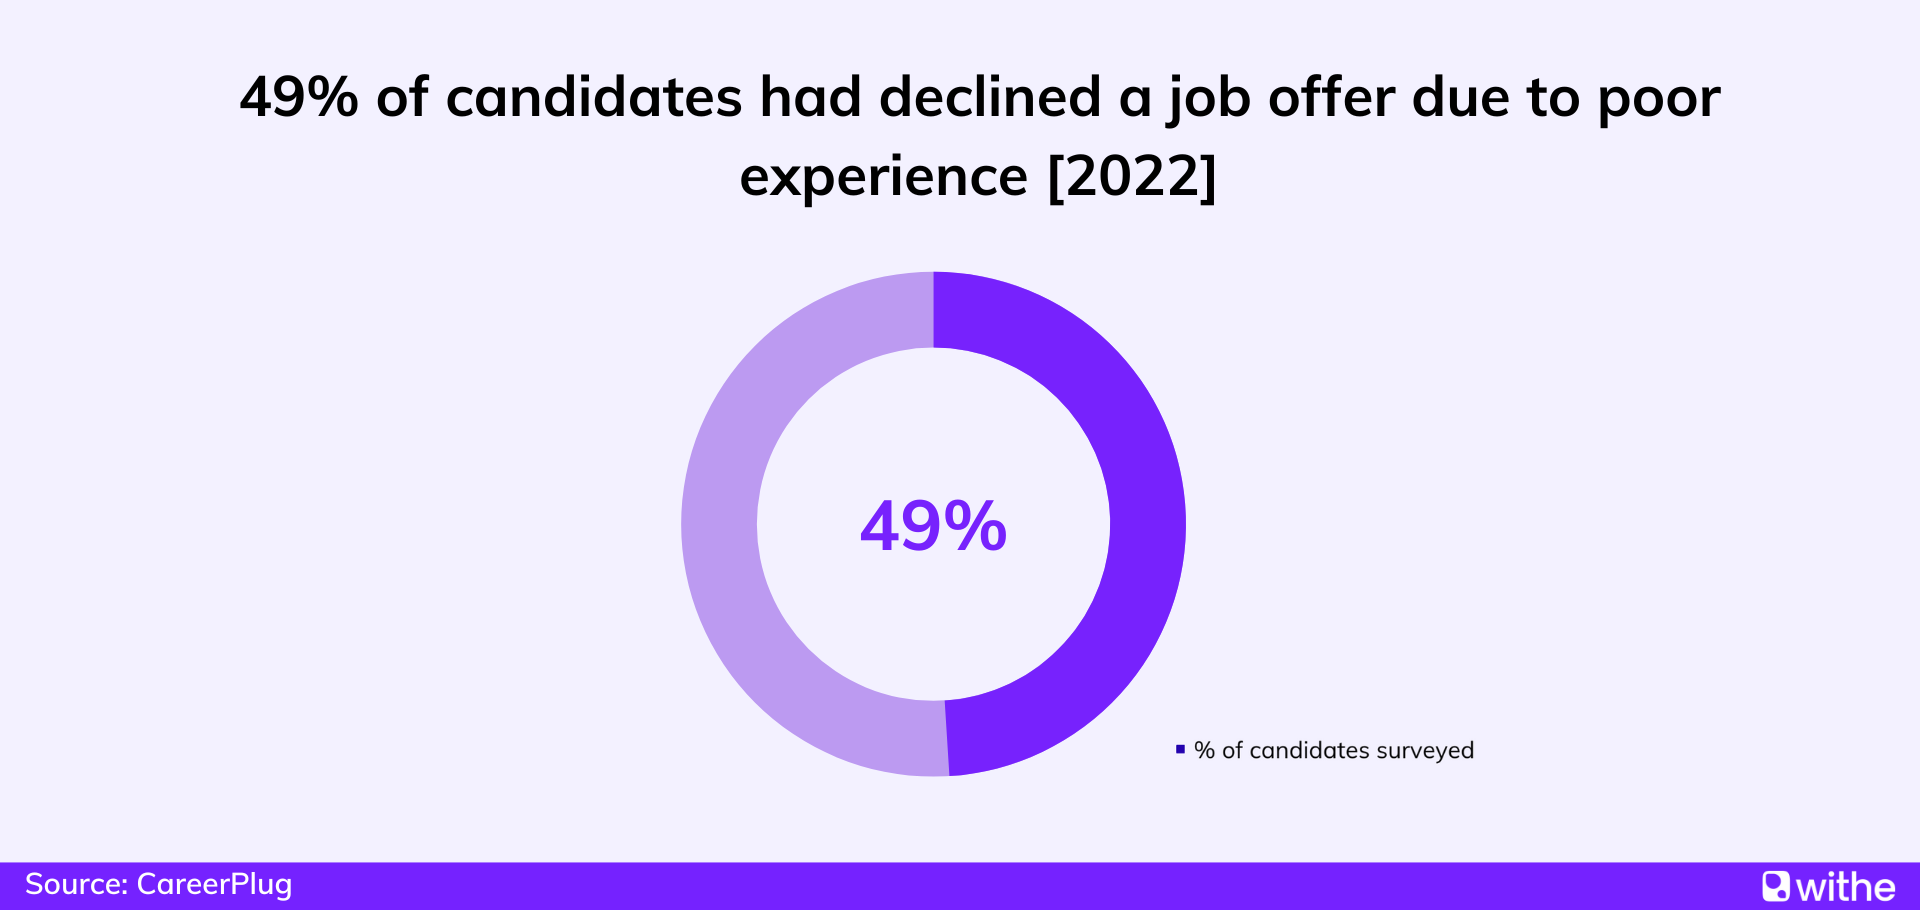 Job offer statistics - 49% of candidates declined a job offer due to poor experience in 2022